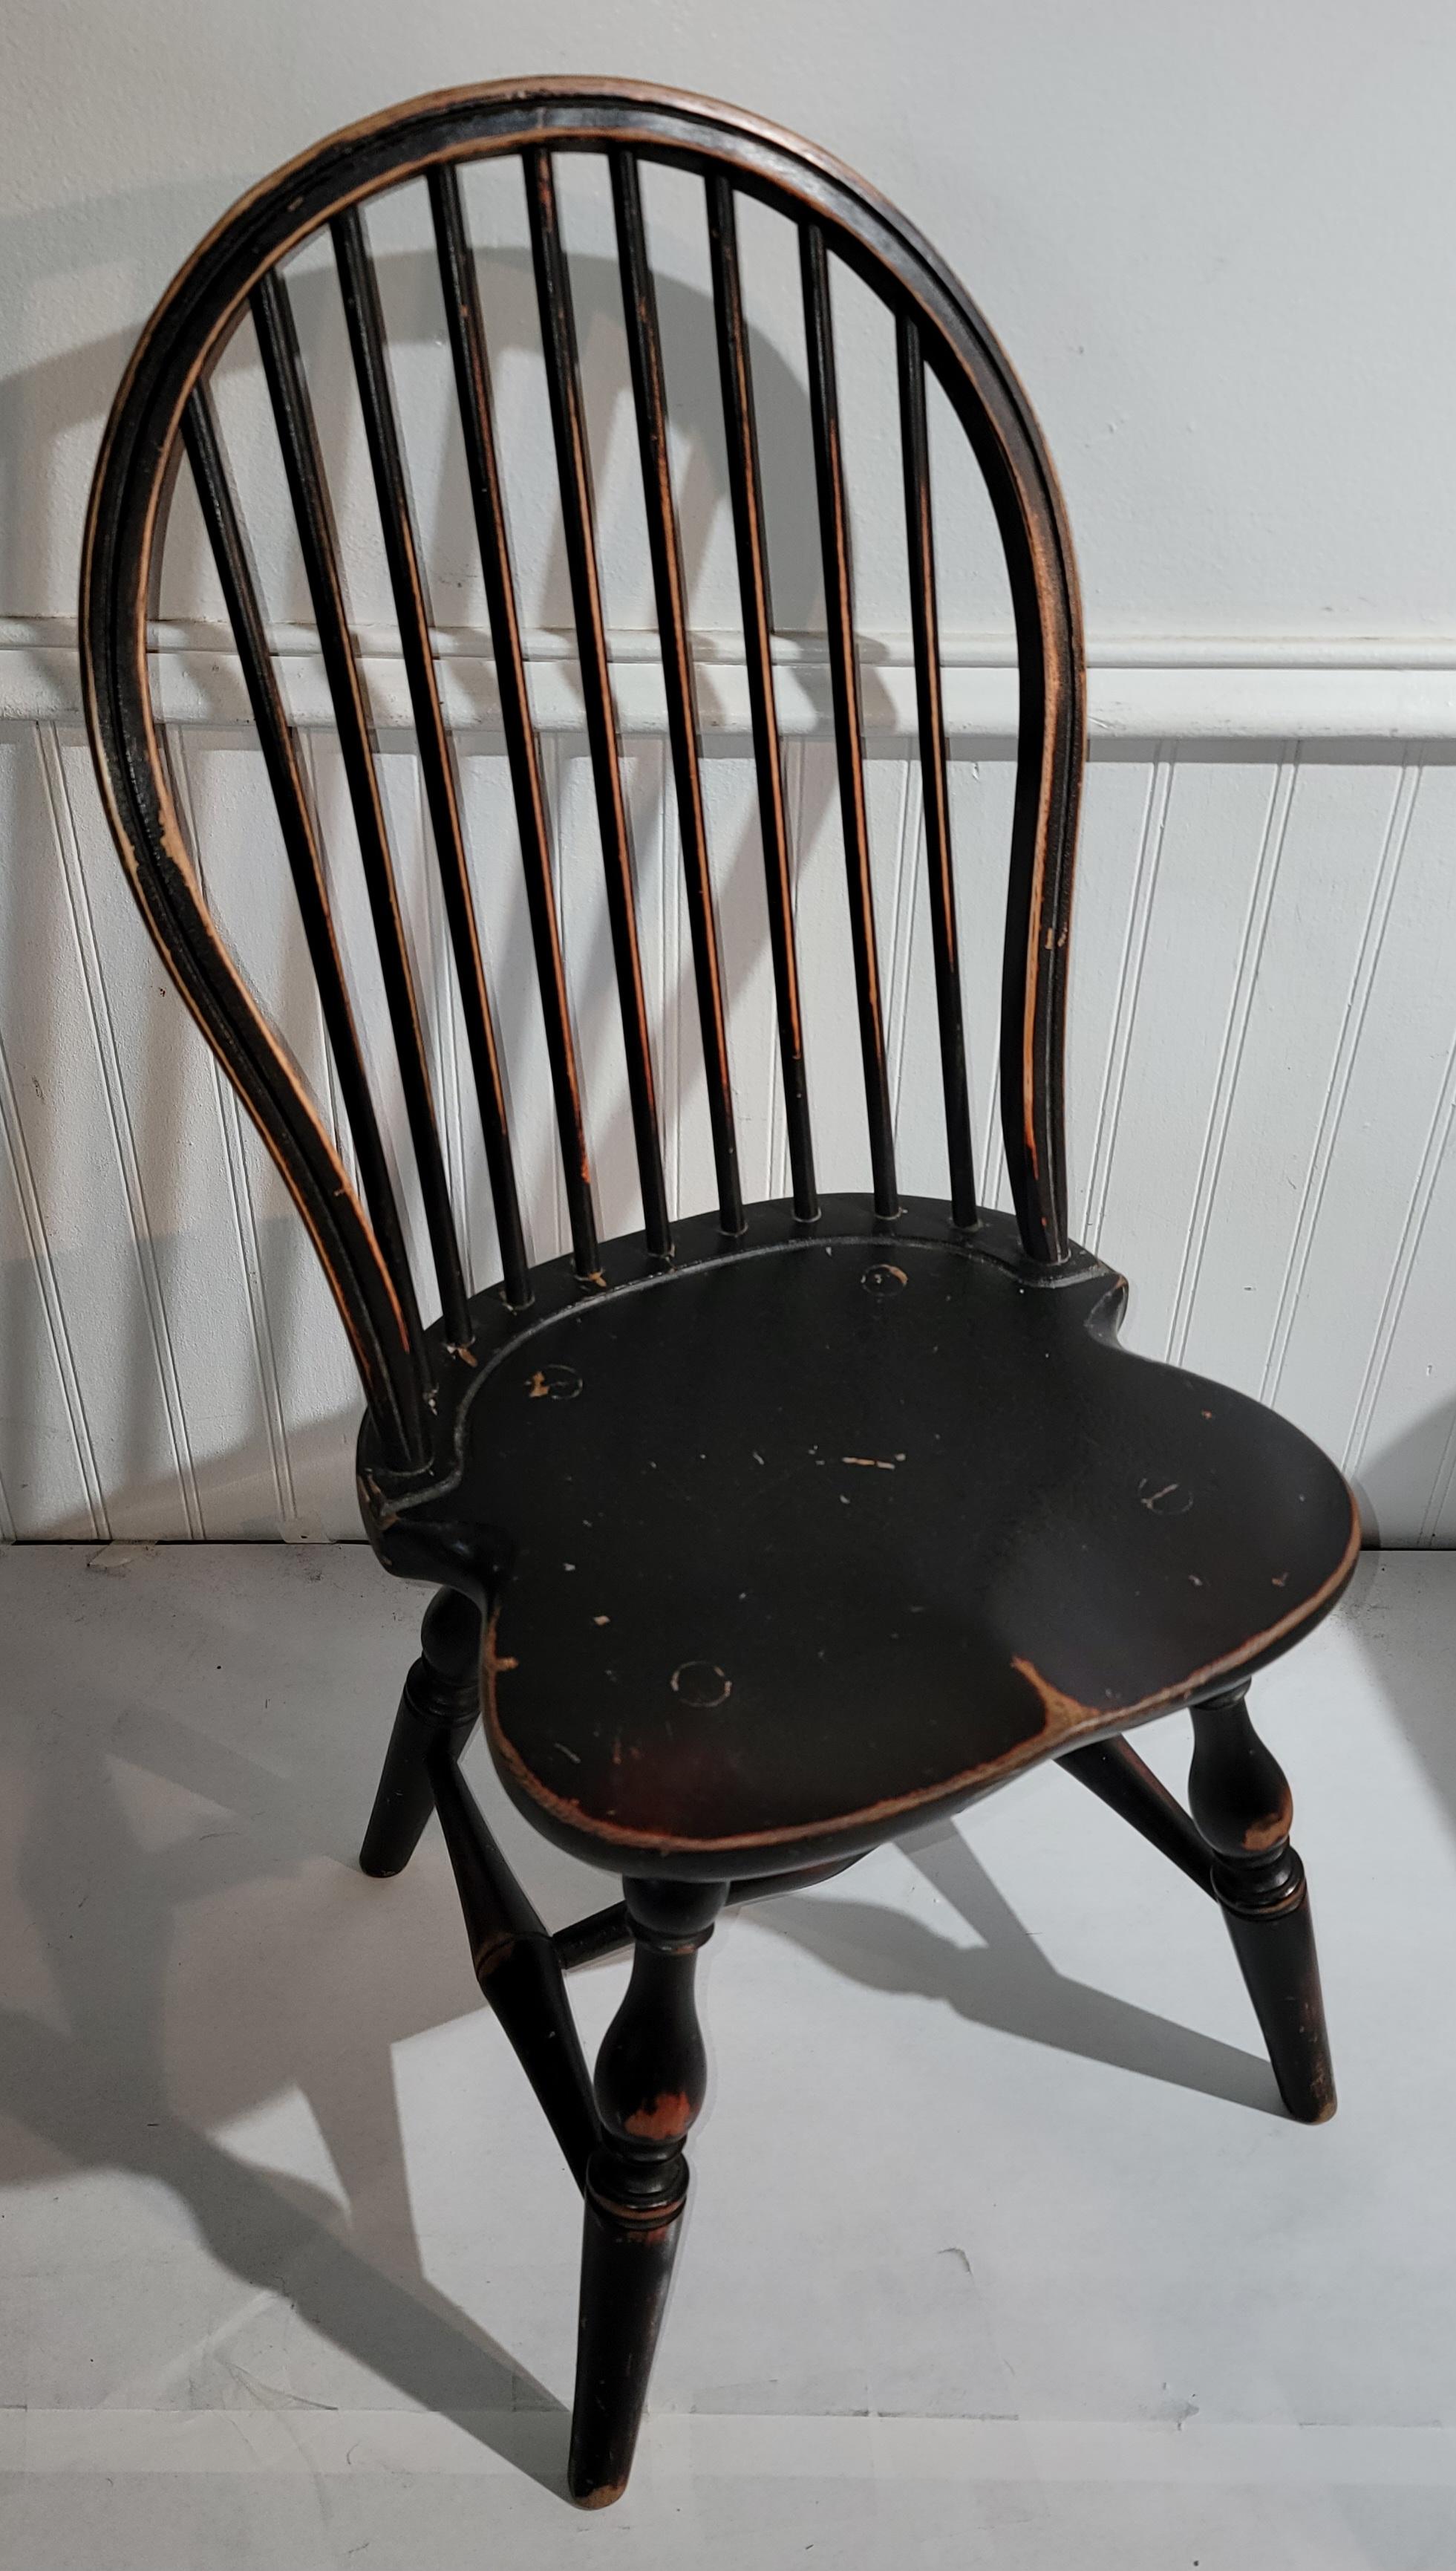 These fine handmade Children's Windsor chairs are in fine as found condition.They are original worn black painted surface and very sturdy condition. They were found in New England.